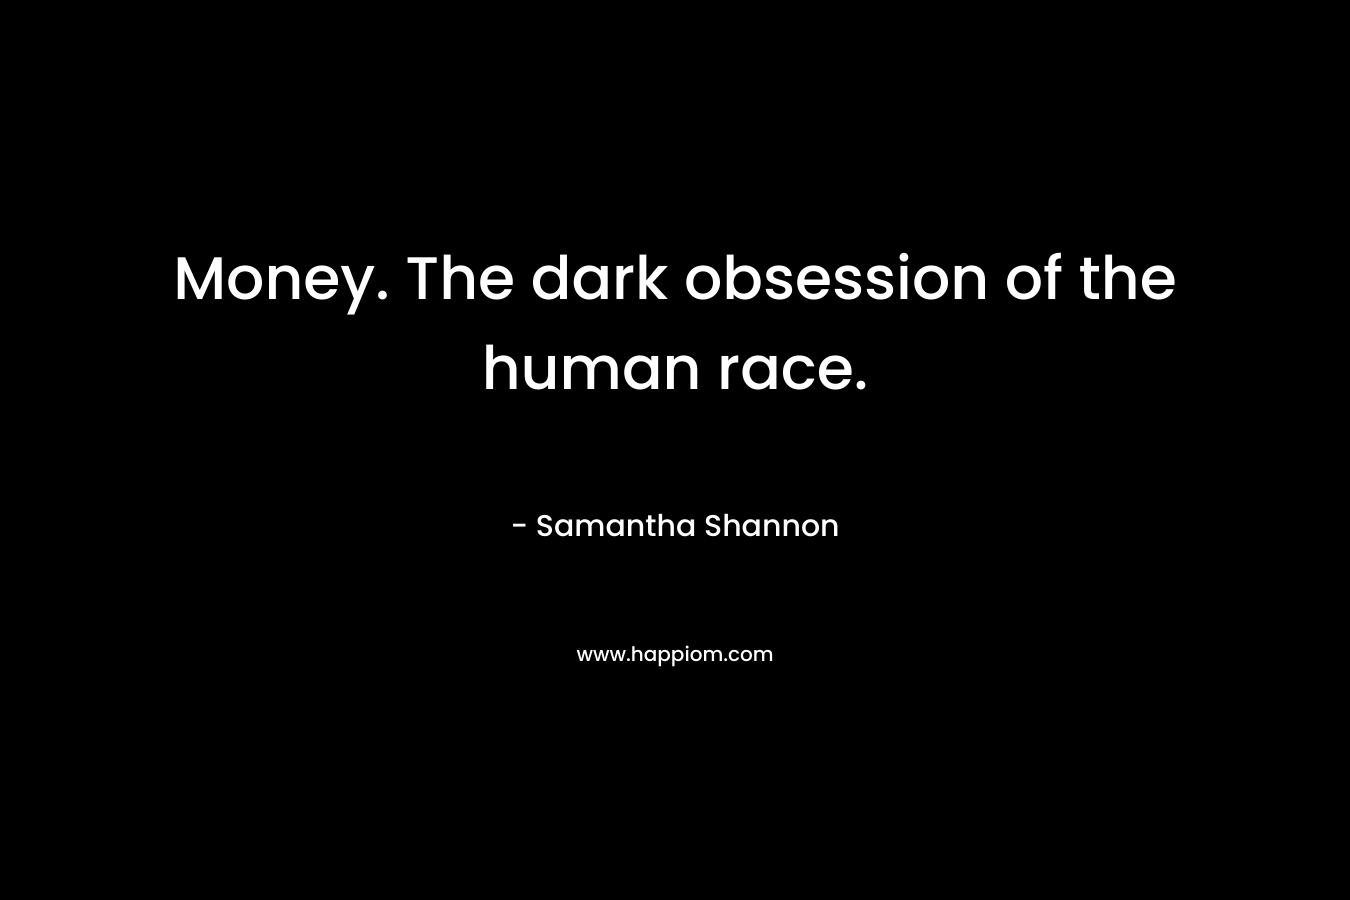 Money. The dark obsession of the human race.